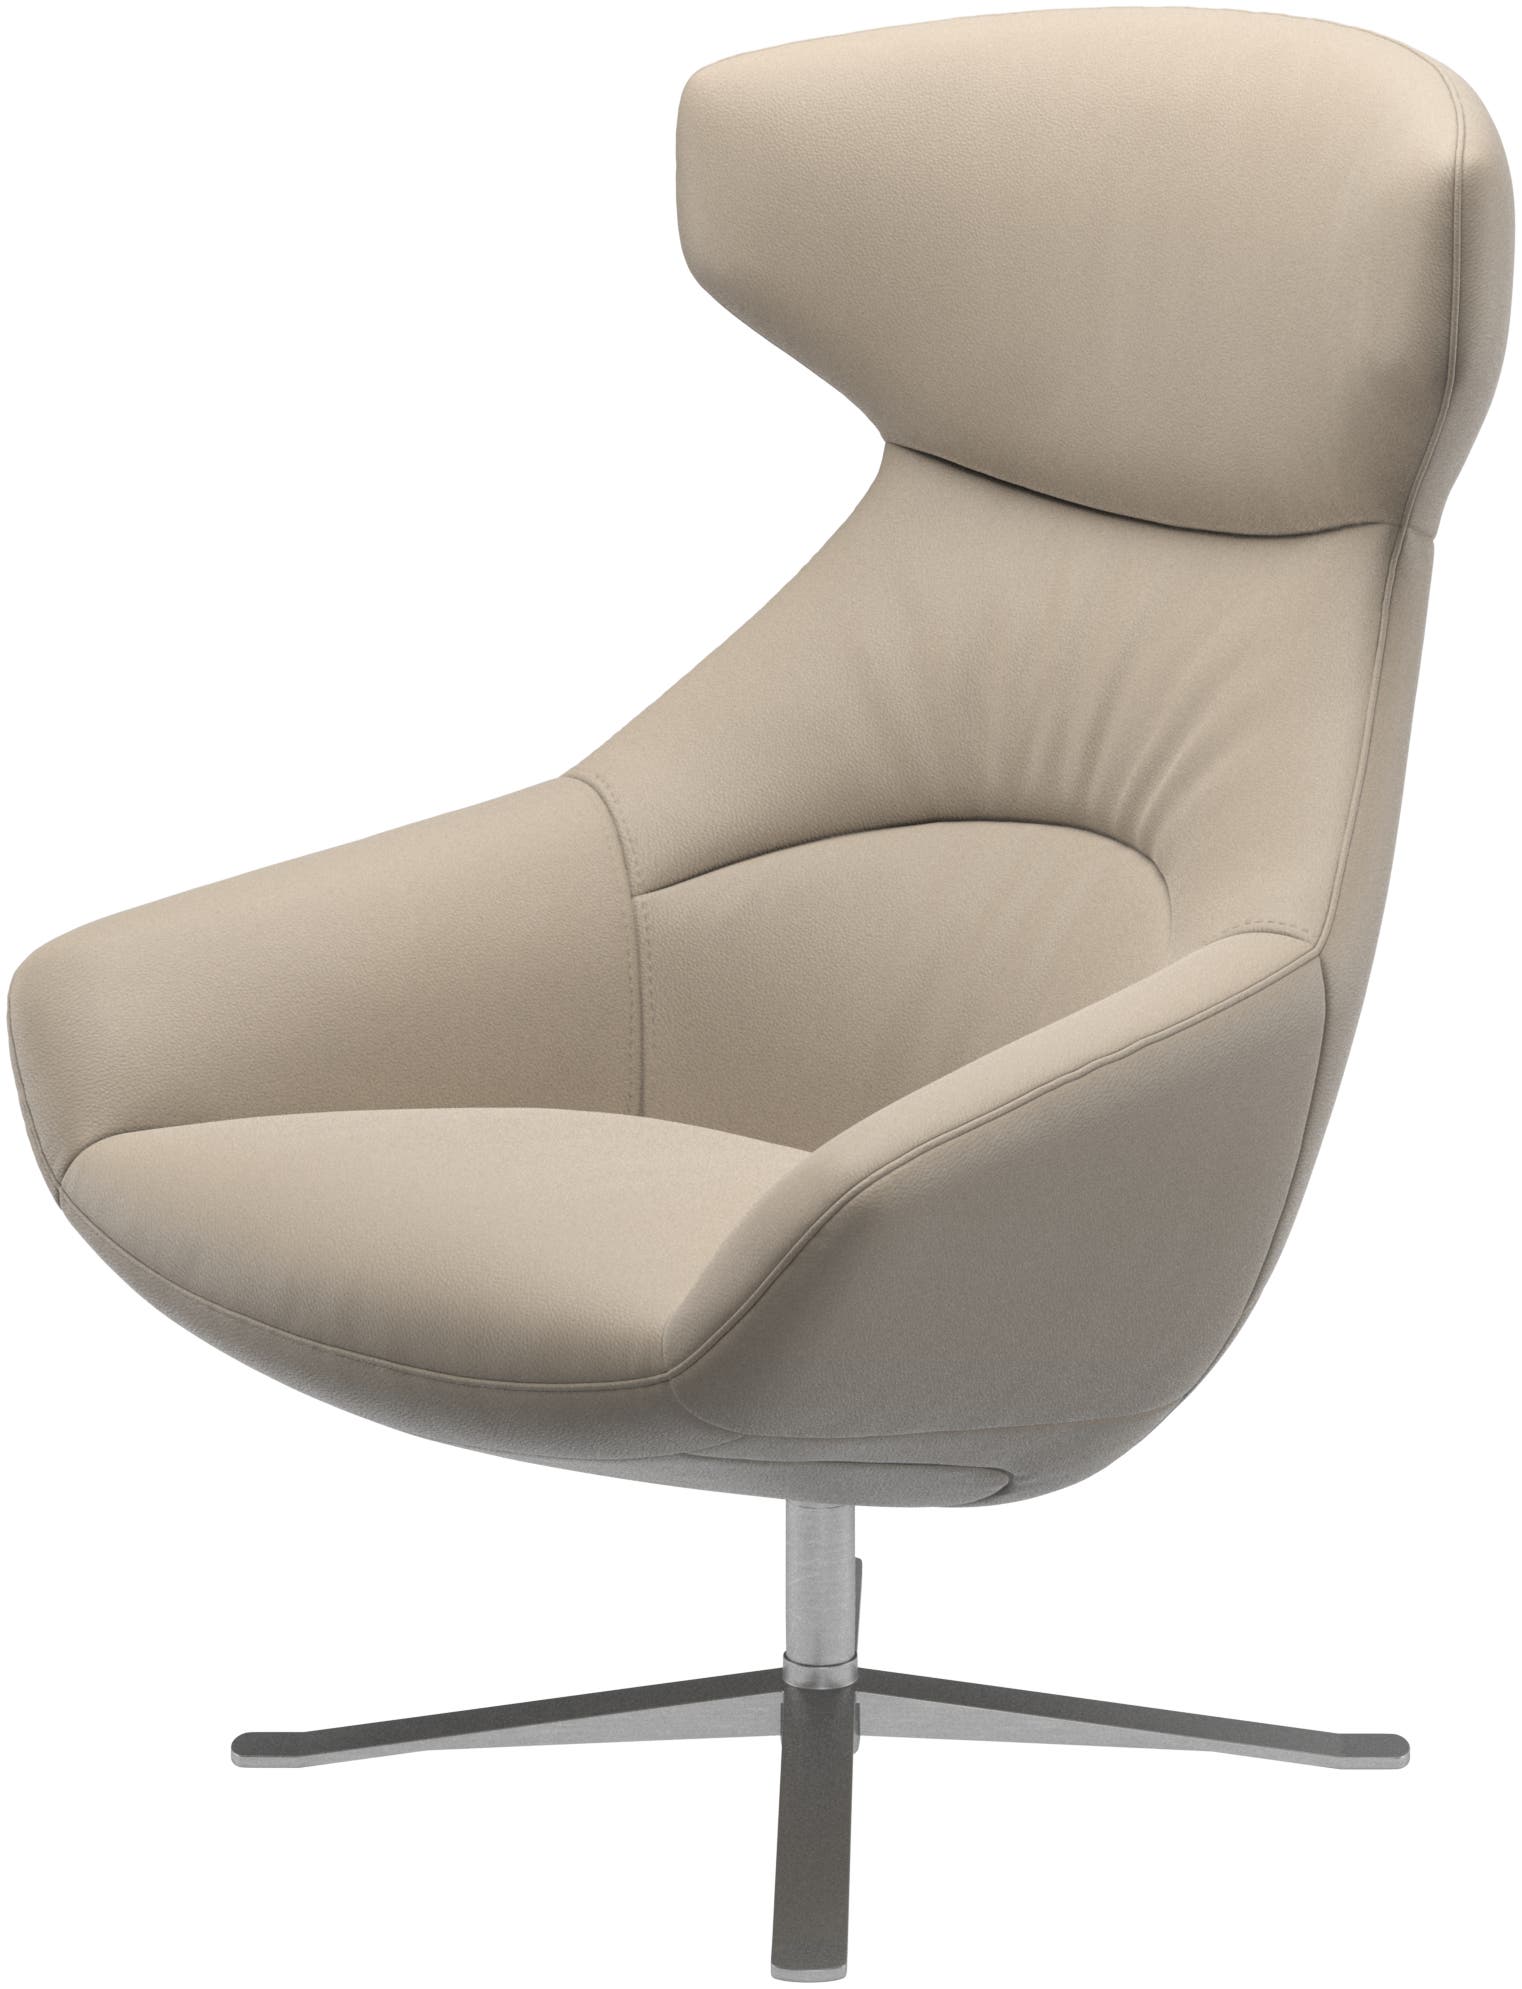 Porto chair with reclining back function and swivel base